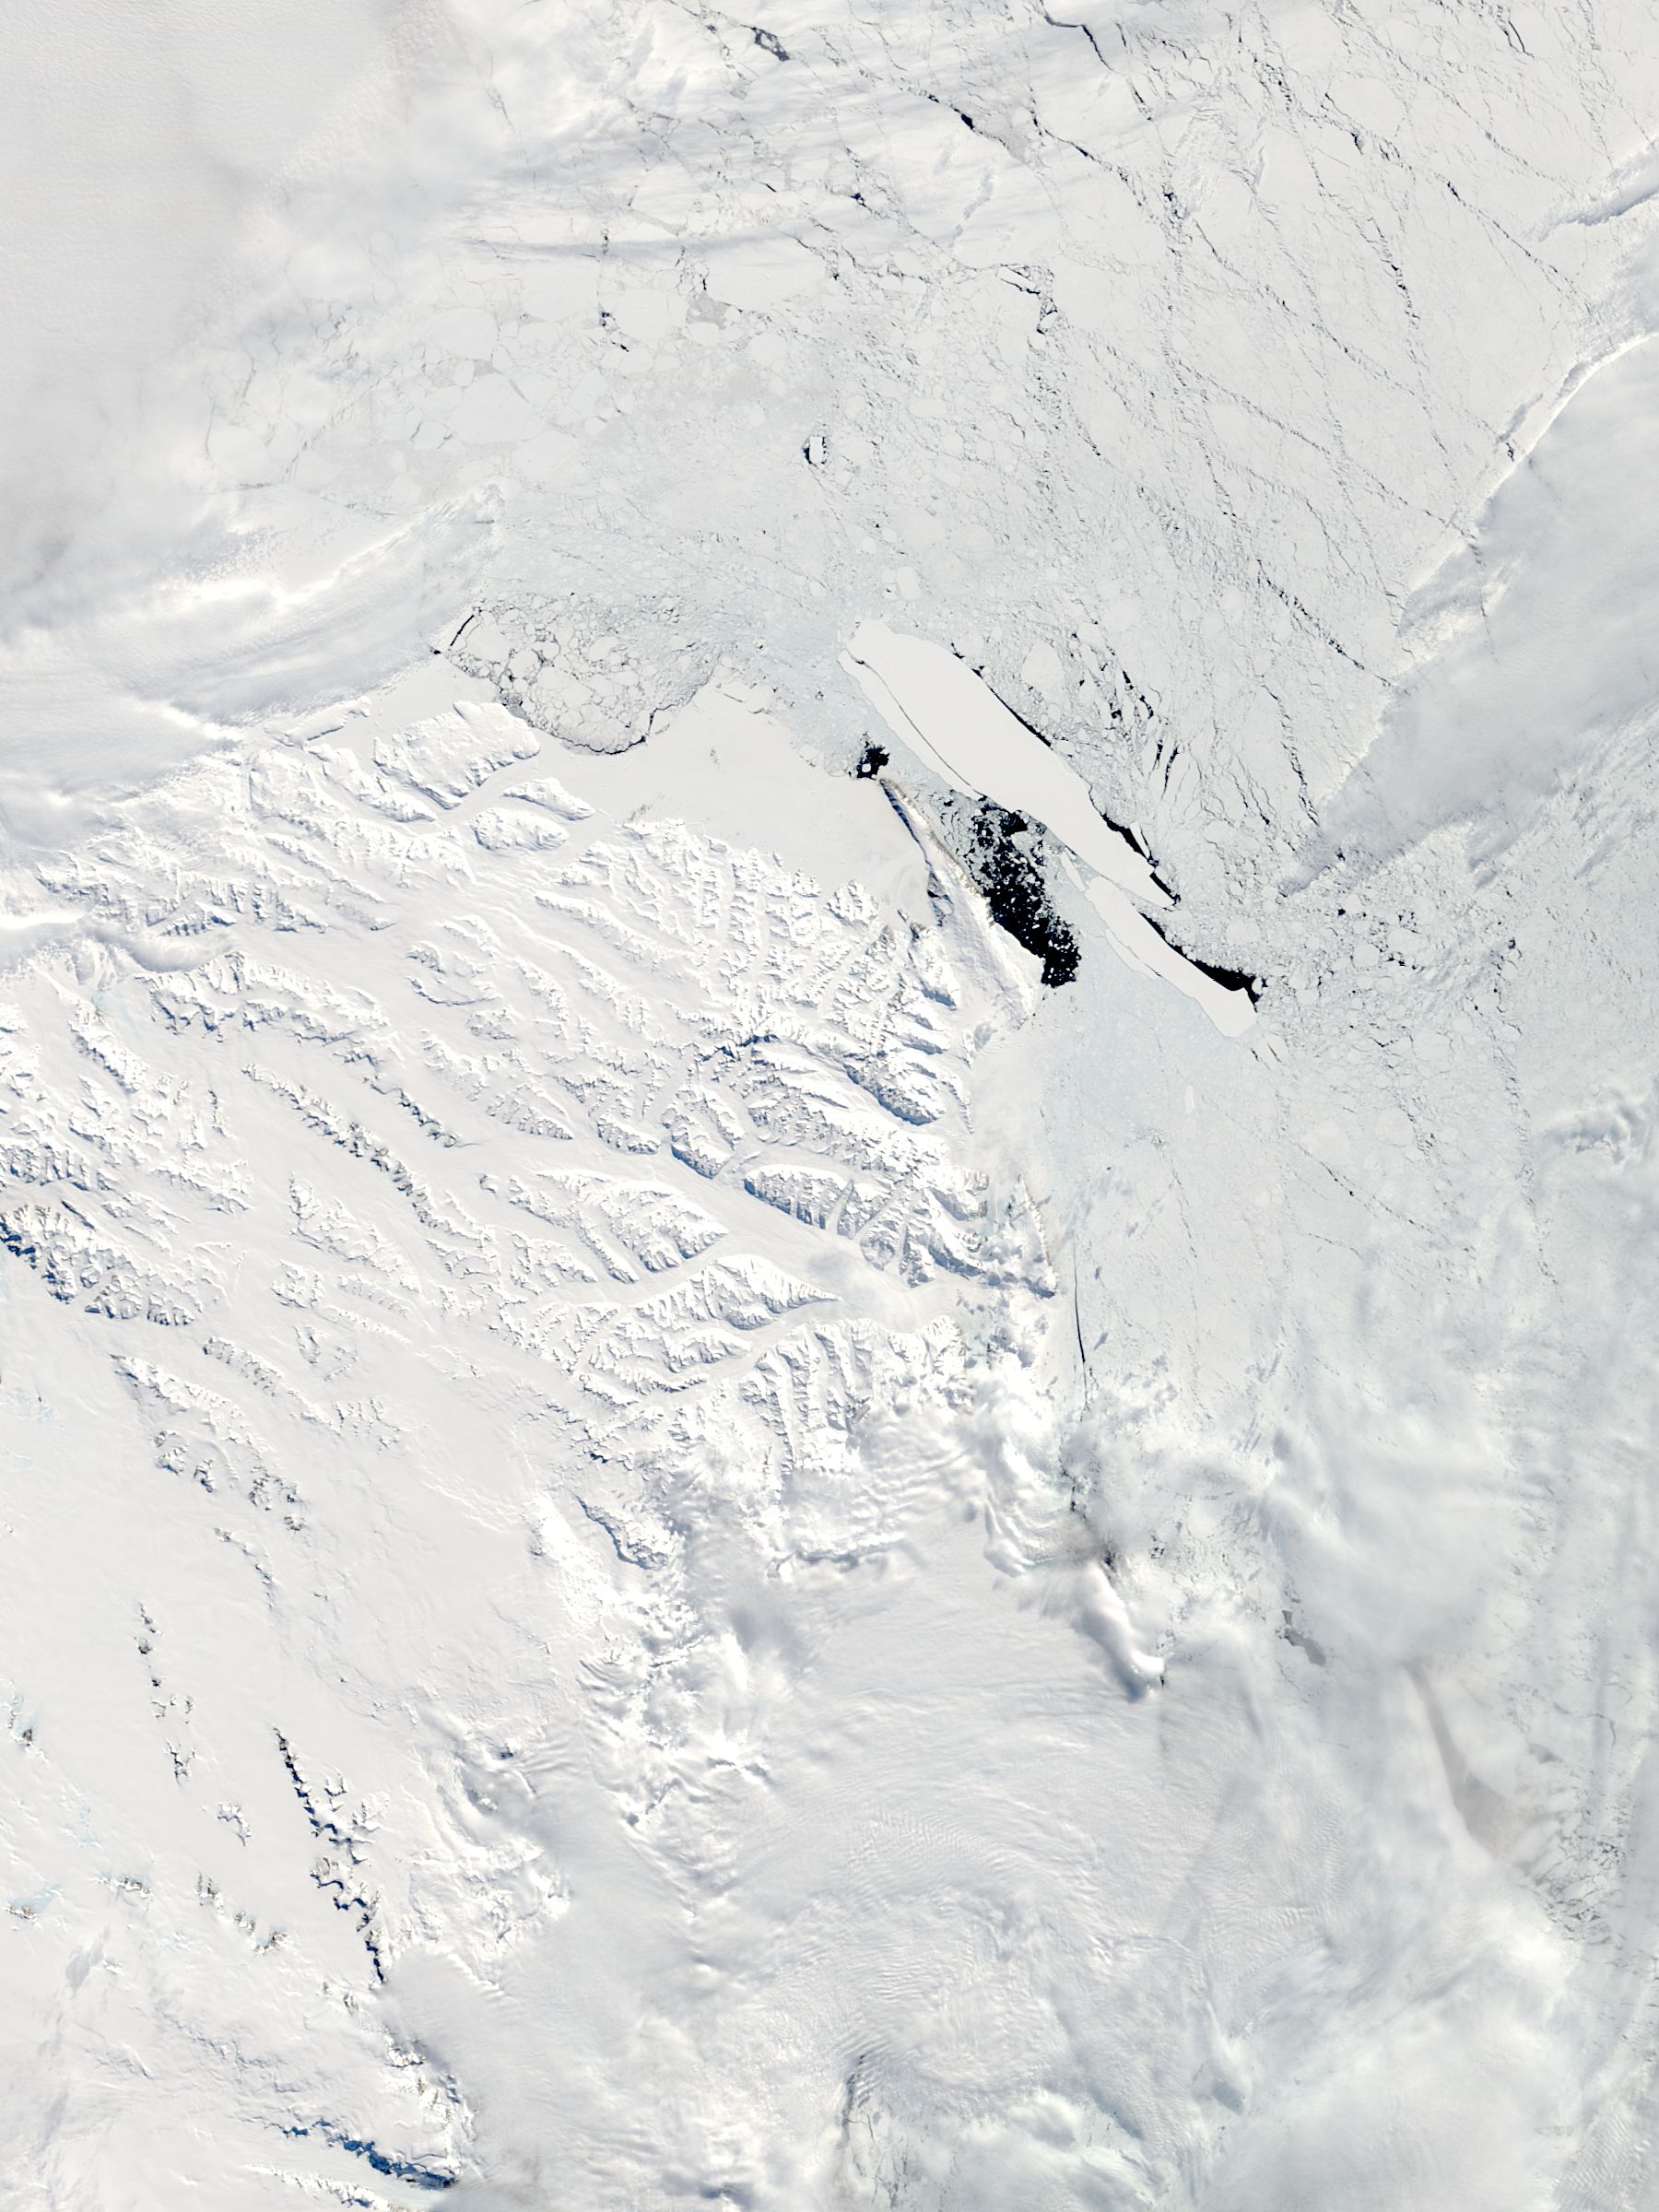 Breakup of B-15A iceberg in the Ross Sea, Antarctica - related image preview